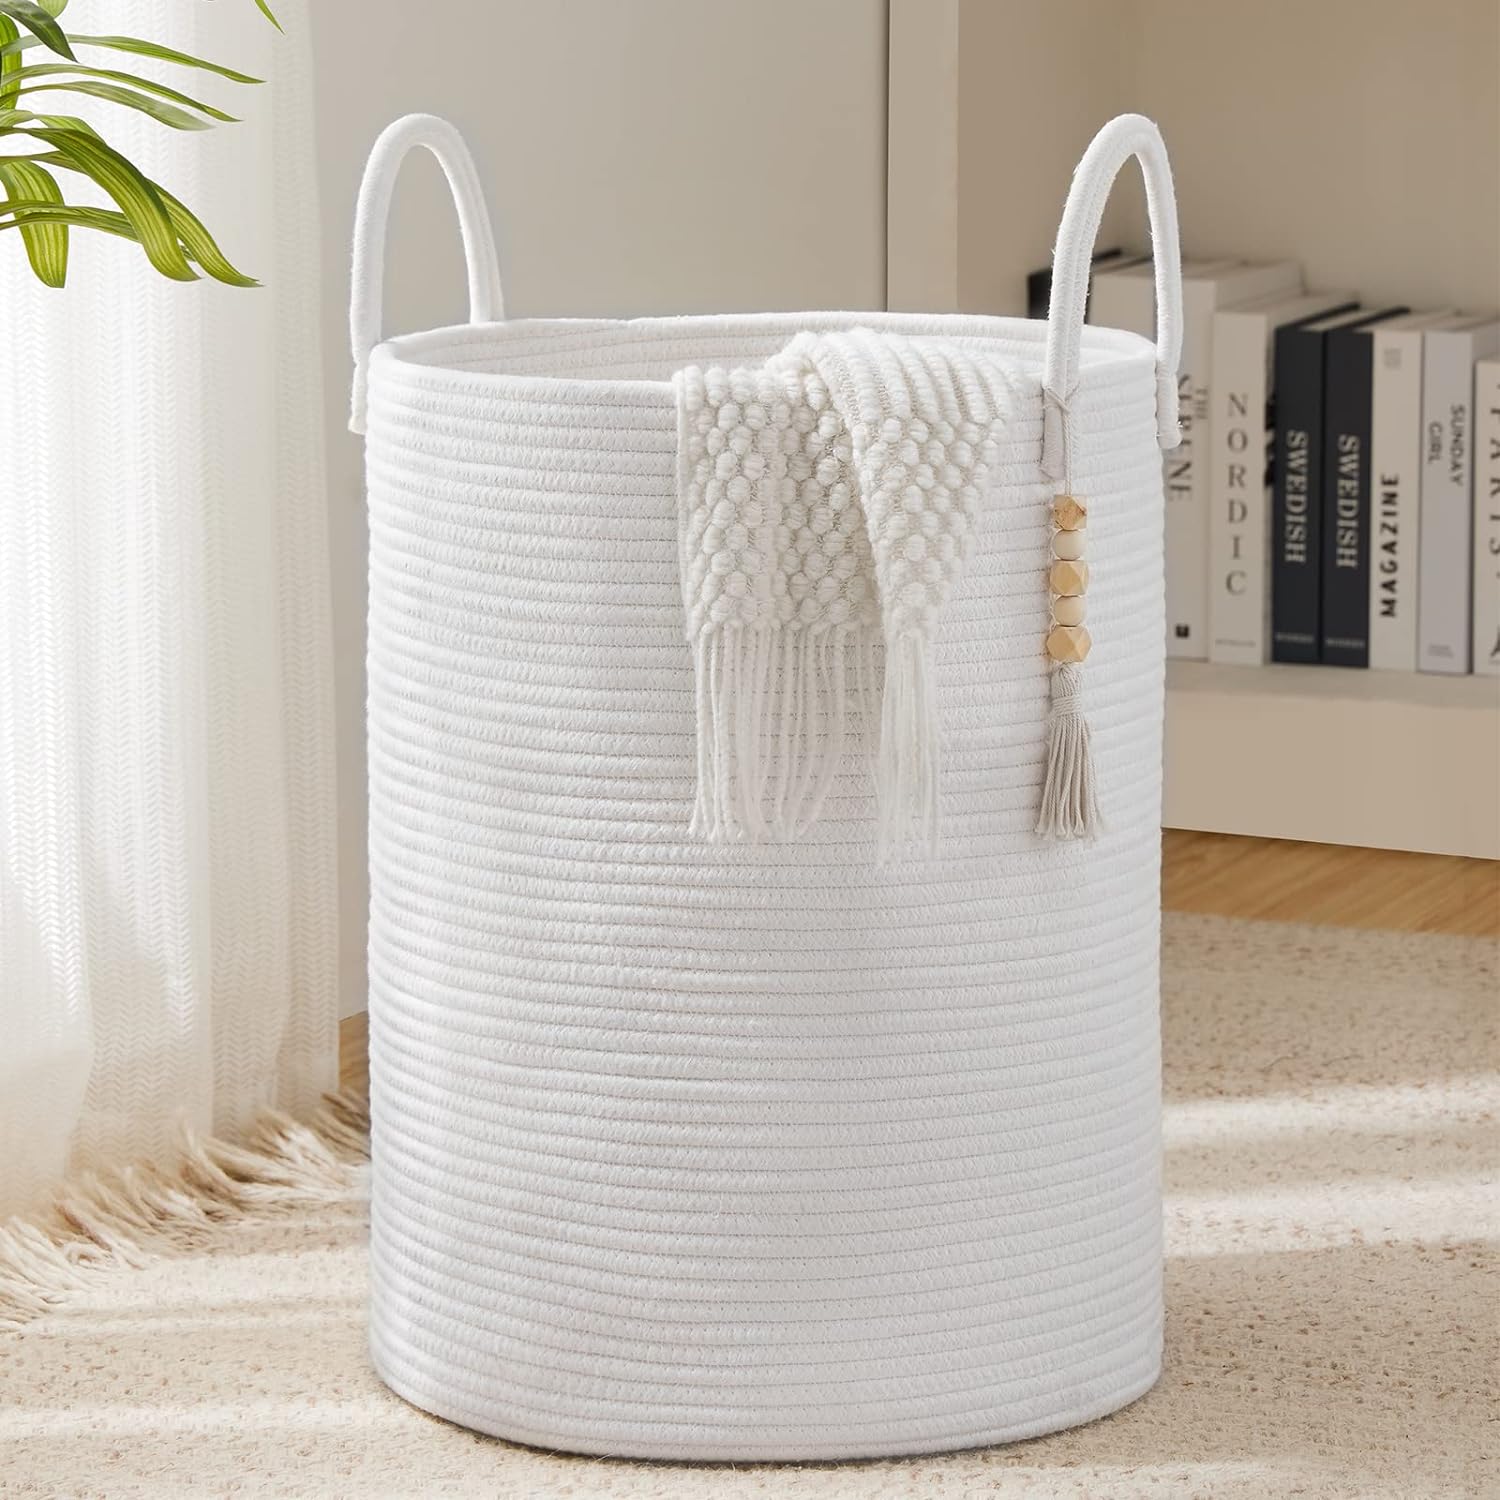 Laundry Basket Essentials: Must-Haves for Tidy Laundry